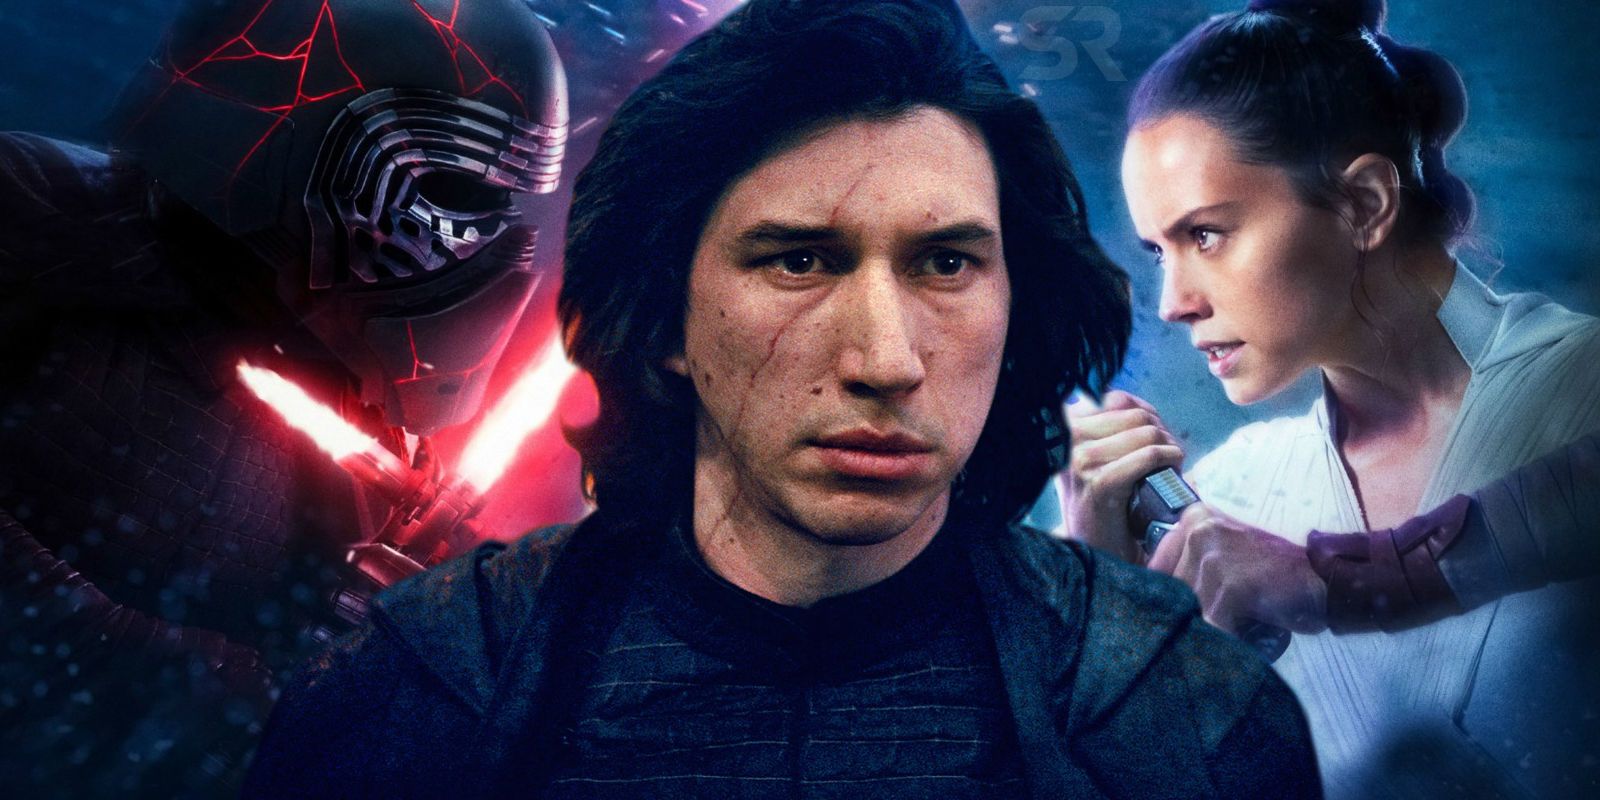 Nine Years After The Force Awakens, Star Wars Still Hasn’t Fully Explained How Kylo Ren Fell To The Dark Side